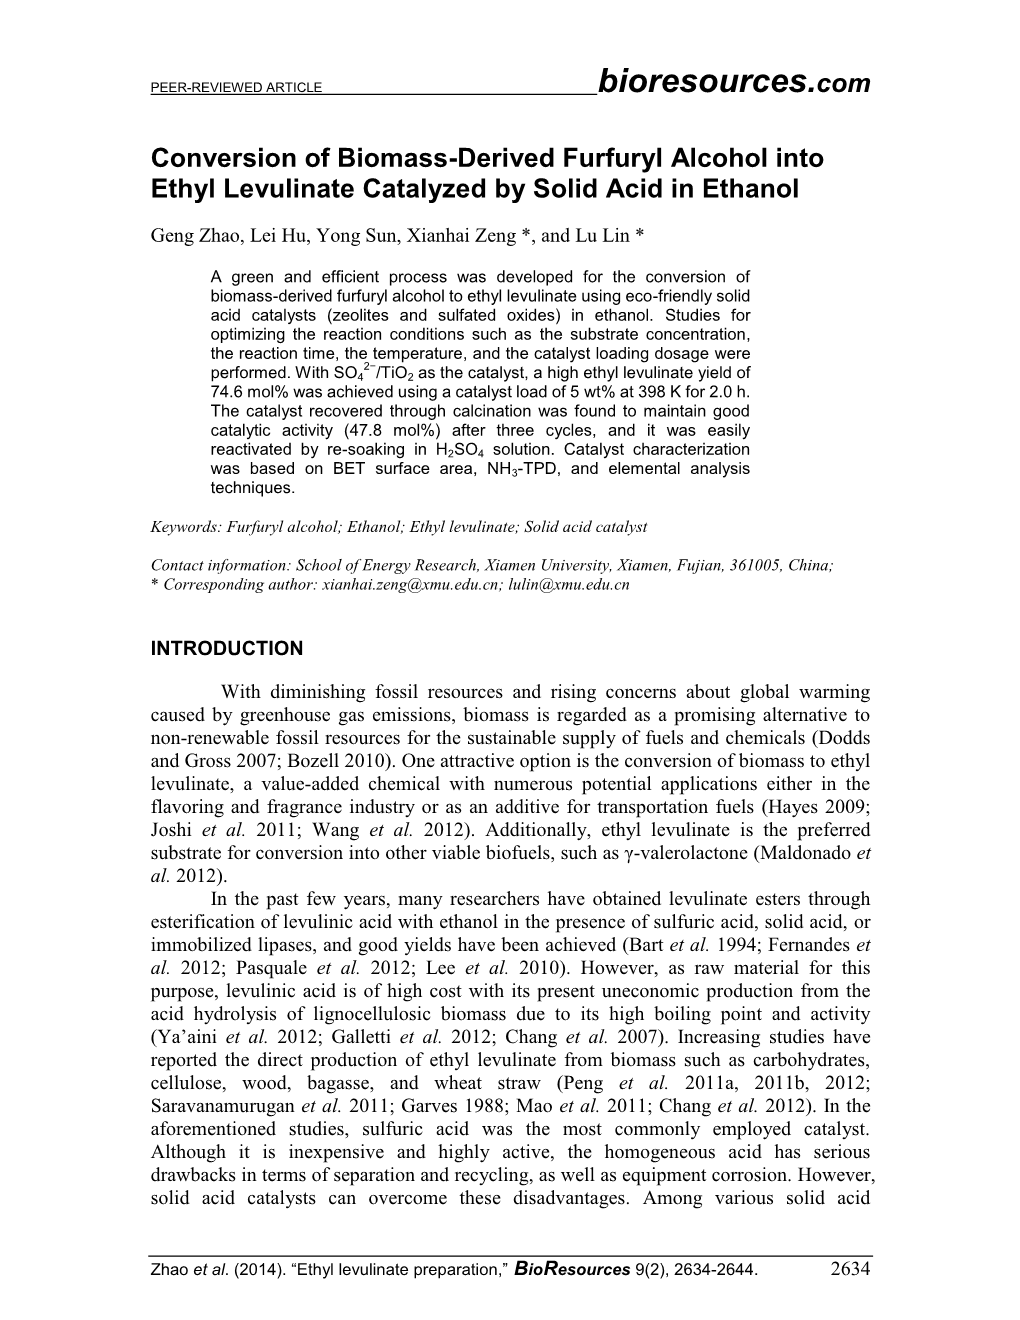 Conversion of Biomass-Derived Furfuryl Alcohol Into Ethyl Levulinate Catalyzed by Solid Acid in Ethanol